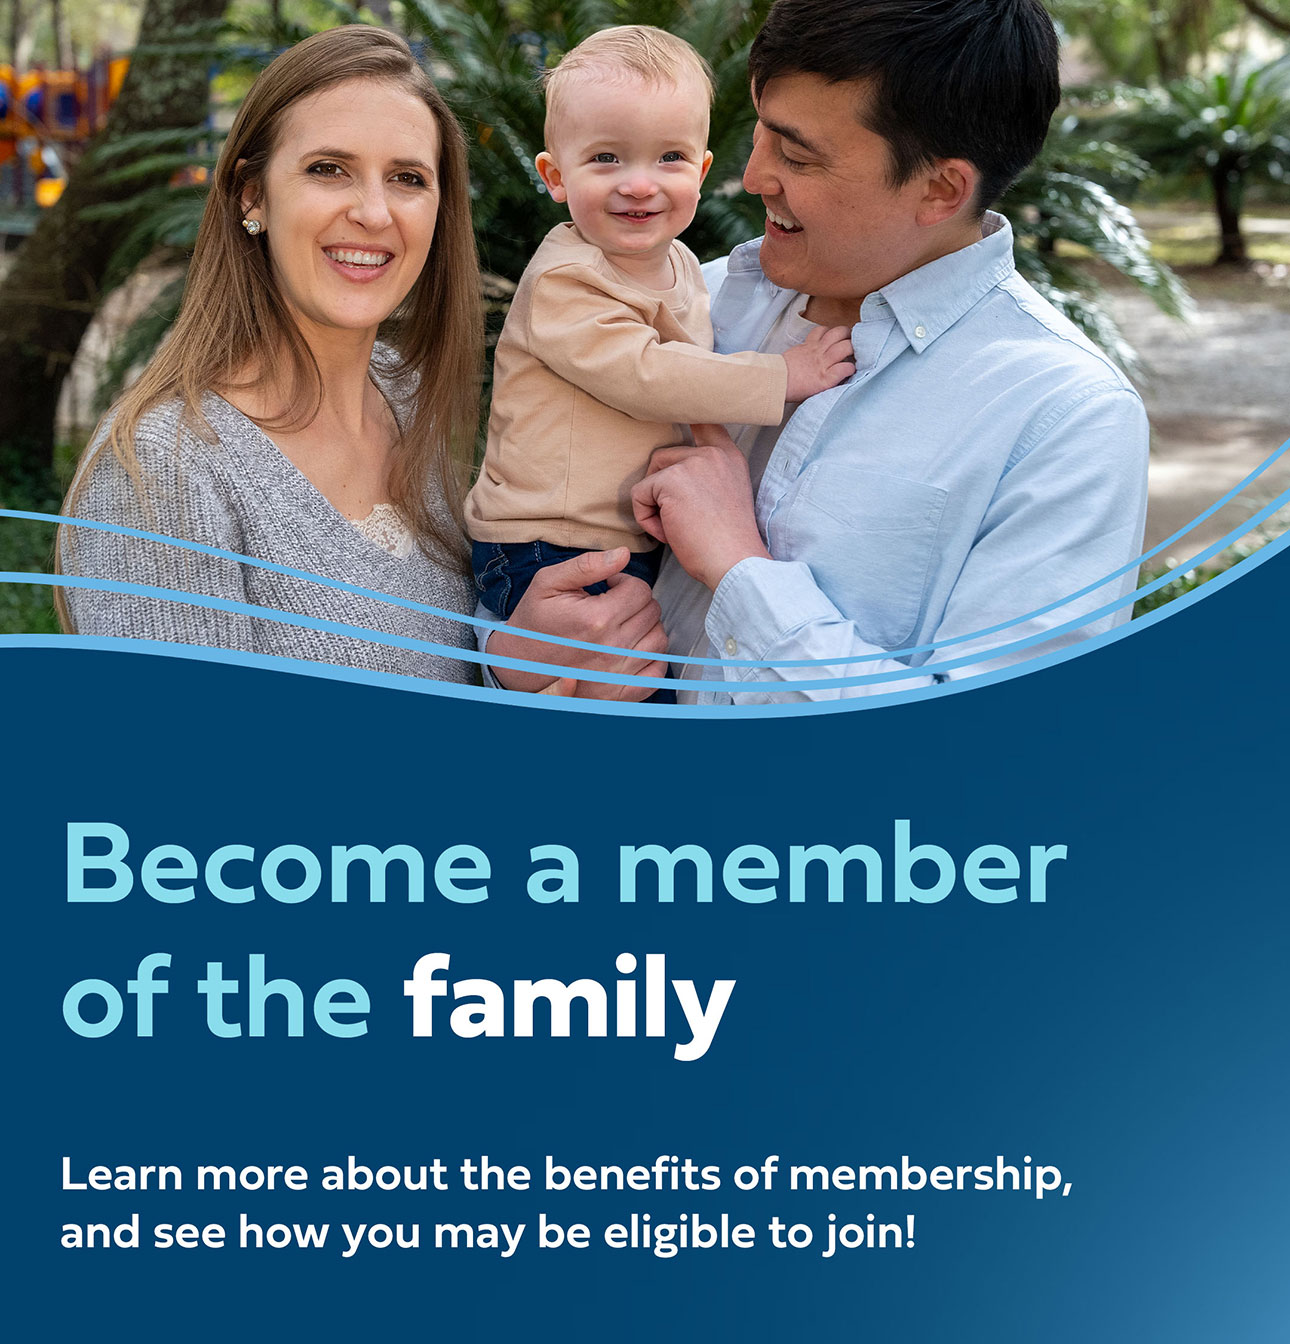 Become a member of the family. Learn more about the benefits of membership, and see how you may be eligible to join!